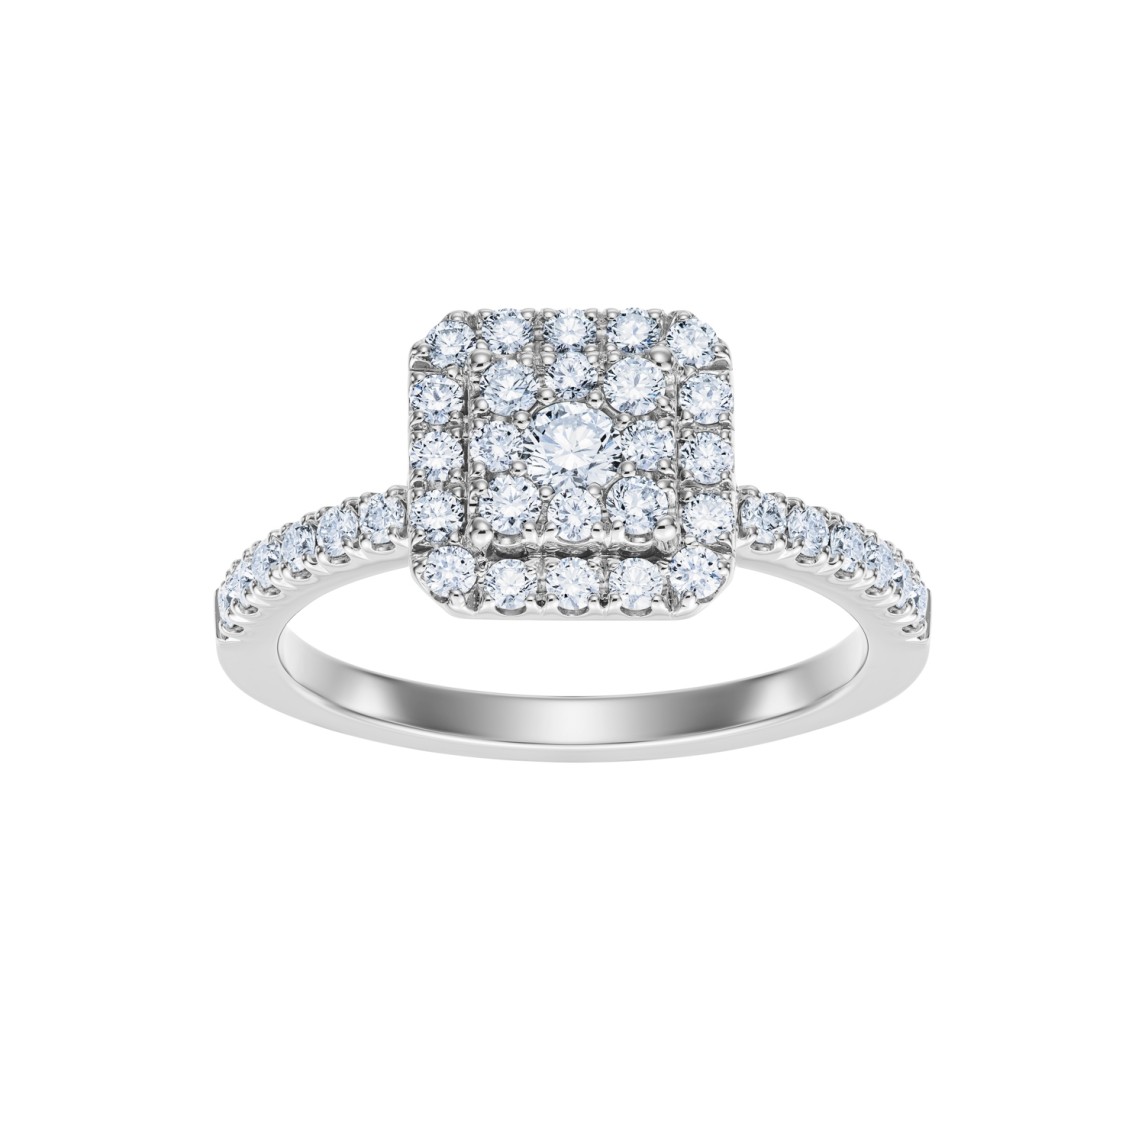 White Gold Ring With Diamonds